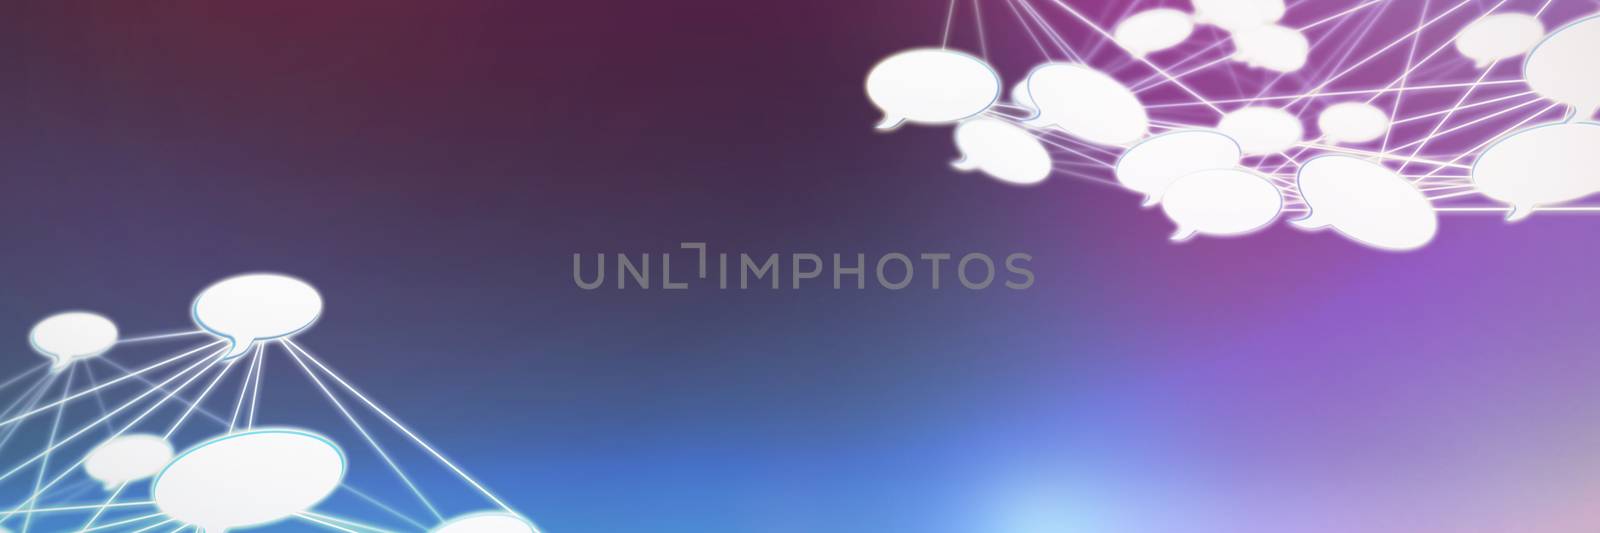 Composite image of abstract image of speech bubble by Wavebreakmedia